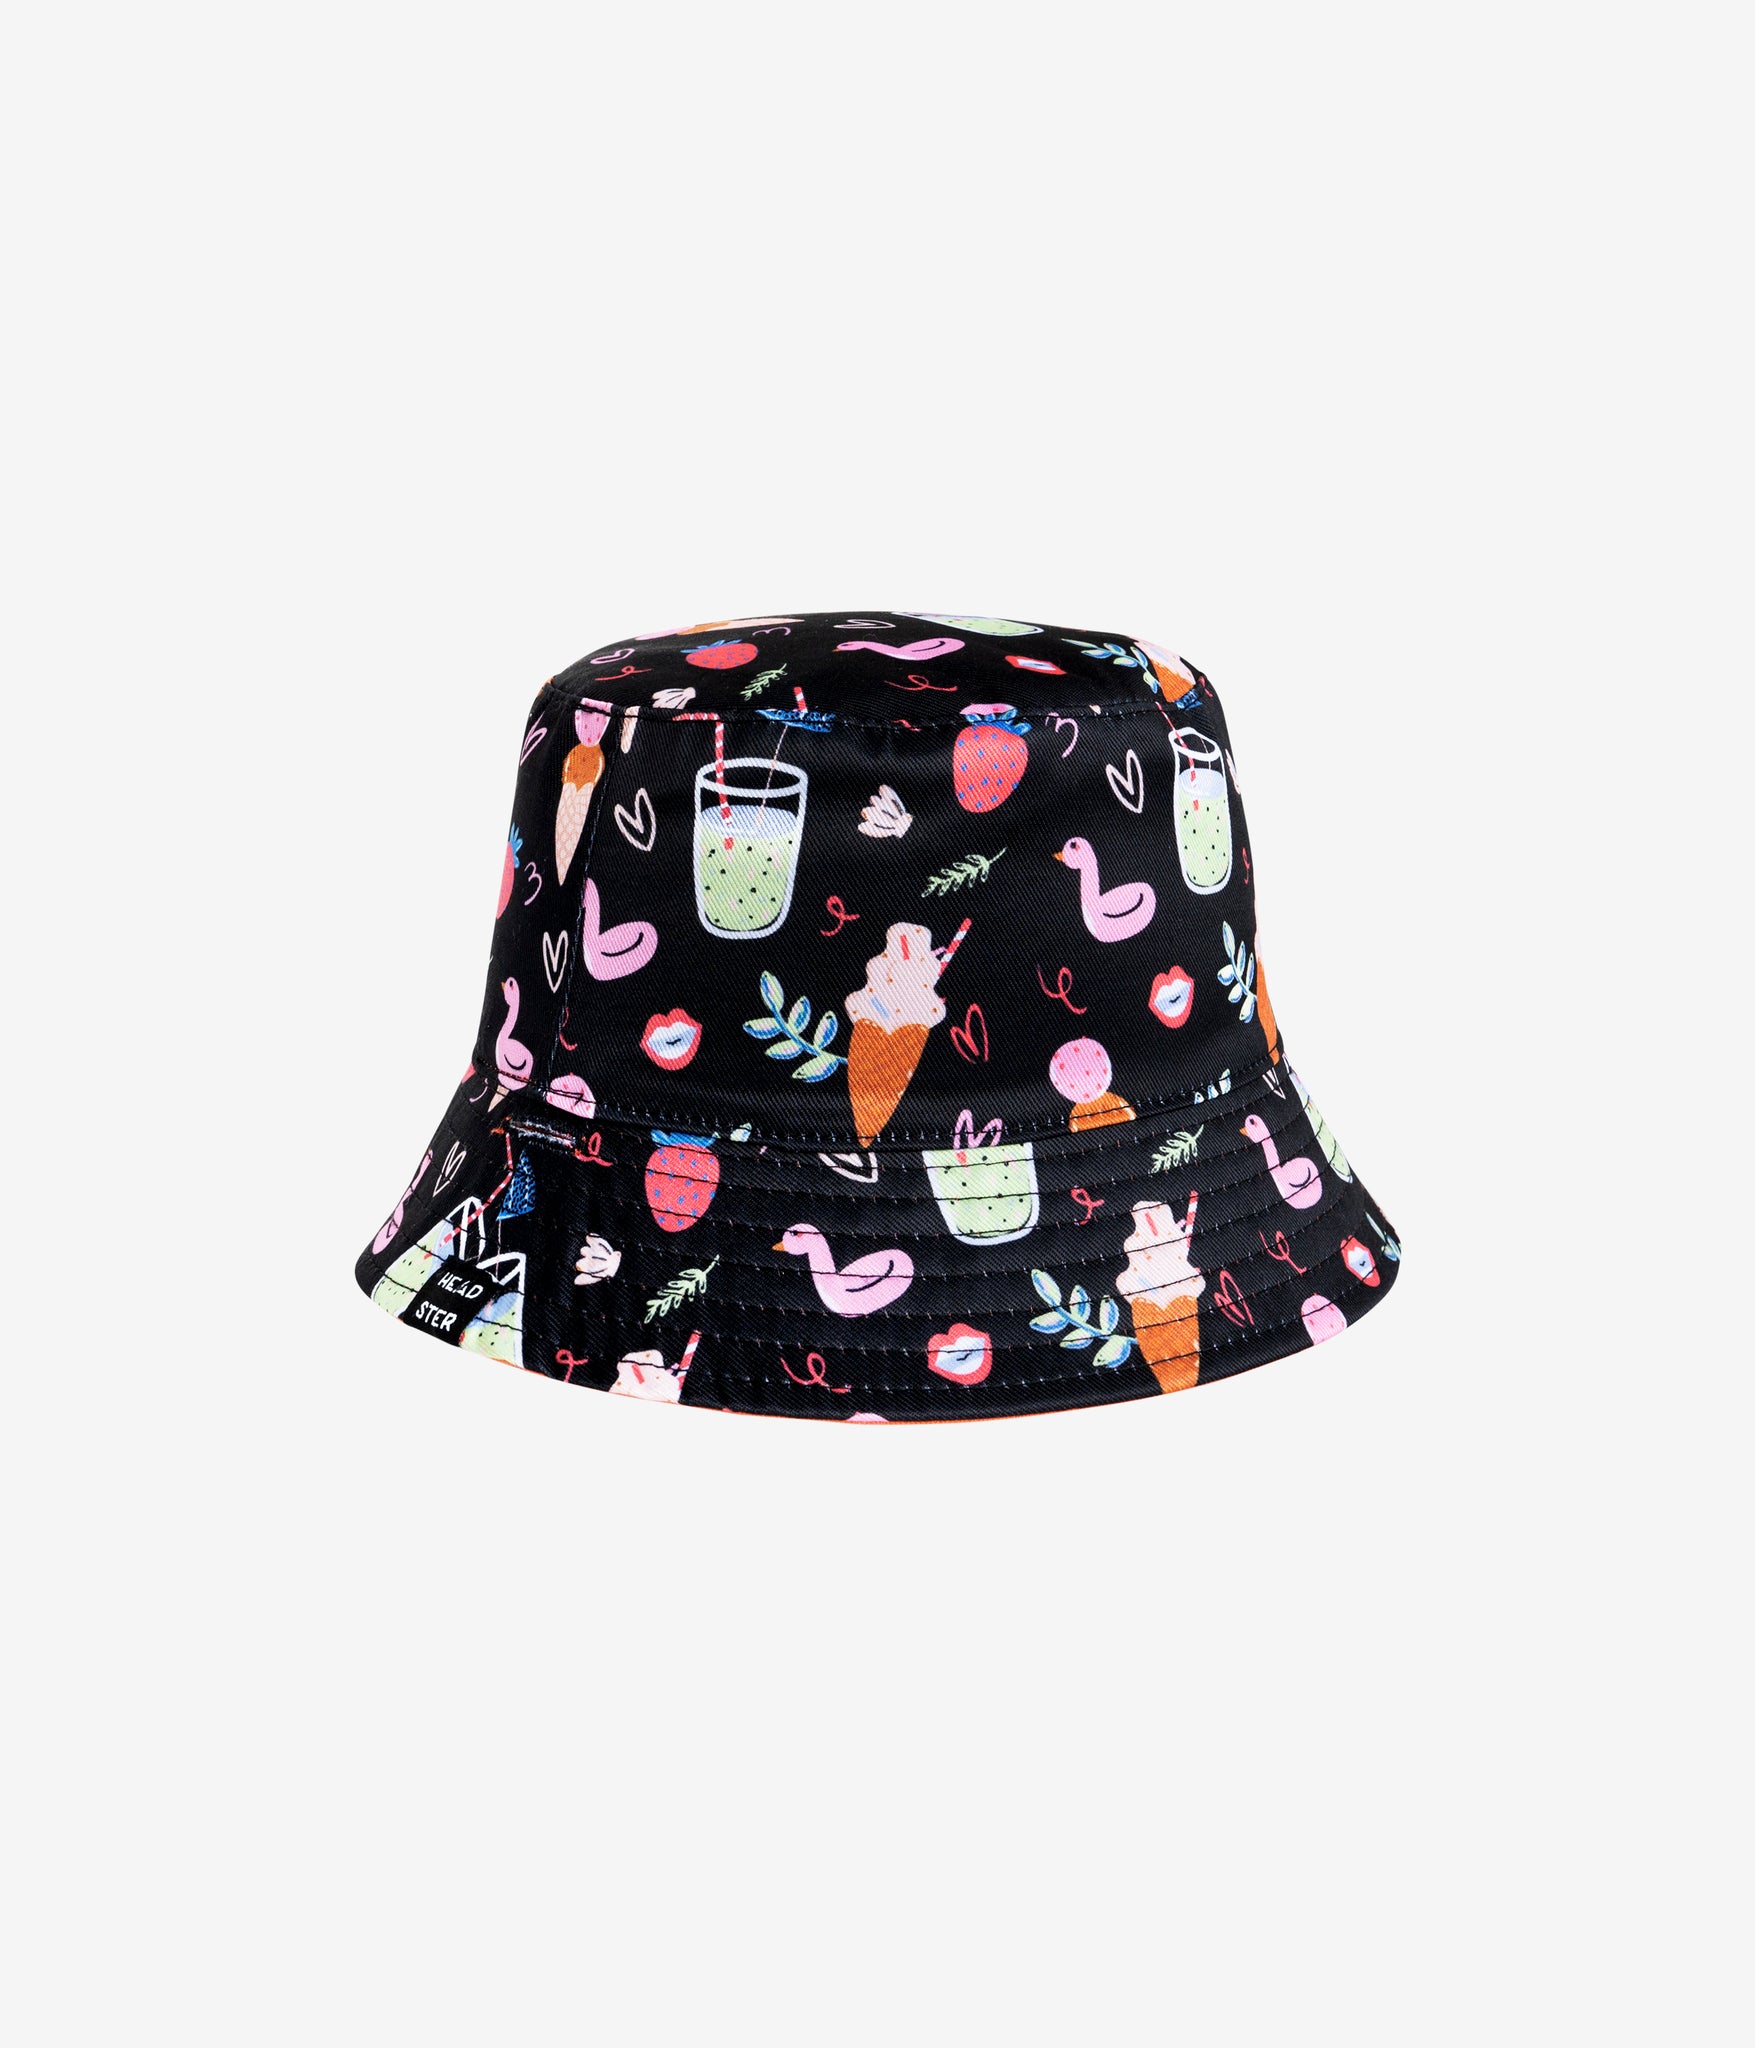 Safari Turquoise Bucket Hat for Kids and Babies‚éüHEADSTER KIDS